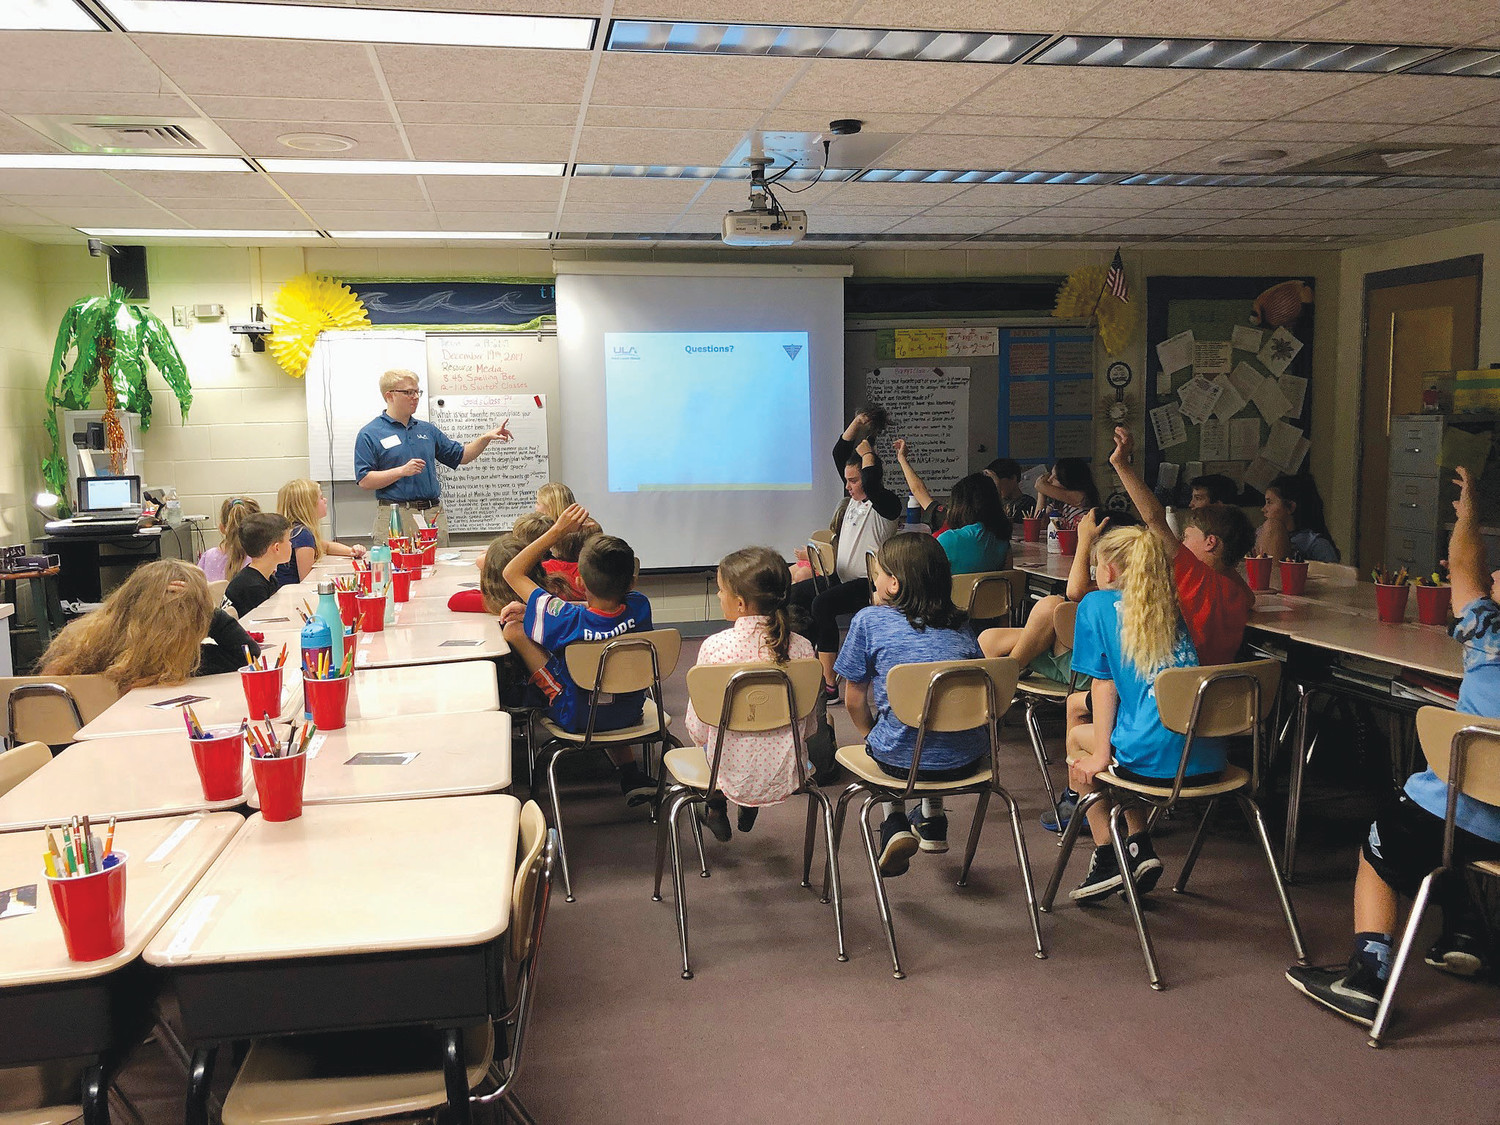 Fourth-grade students at Ocean Palms Elementary School (OPES) recently had the opportunity to learn about rockets, satellites and space when they were visited by guest speaker Tyler Strickland, a flight design and mission engineer for United Launch Alliance (ULA). Using virtual reality viewers, the students watched a recent rocket launch and were inspired to learn more about space and improve their problem-solving skills through teamwork.